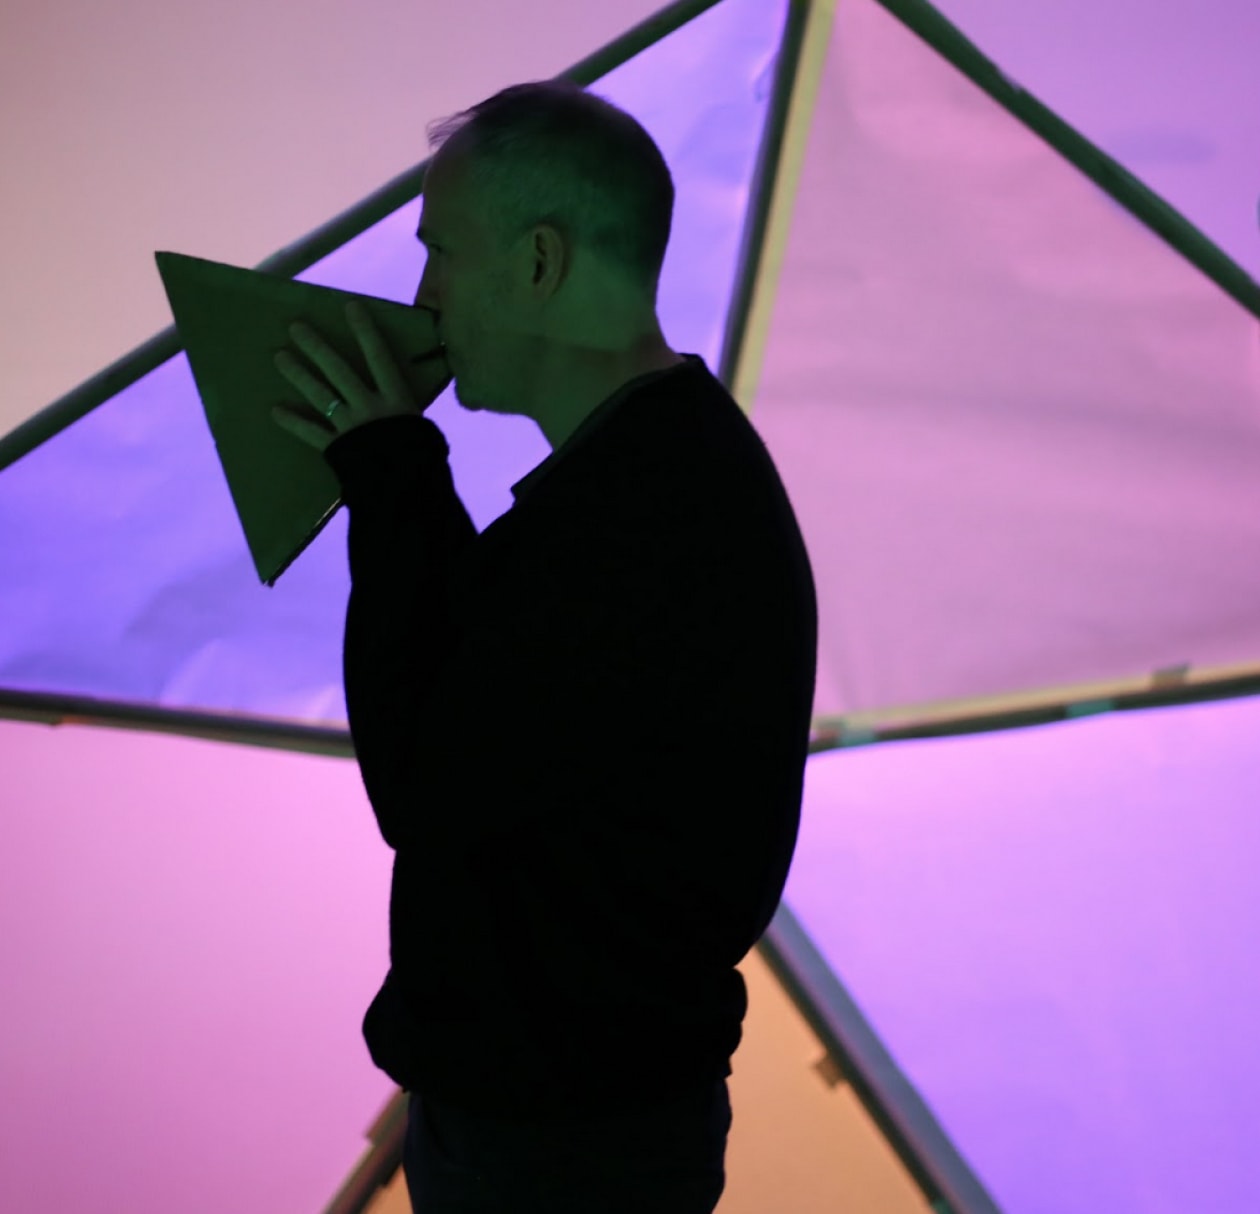 A man speaks through a triangular megaphone infront of purple and pink geometric panels